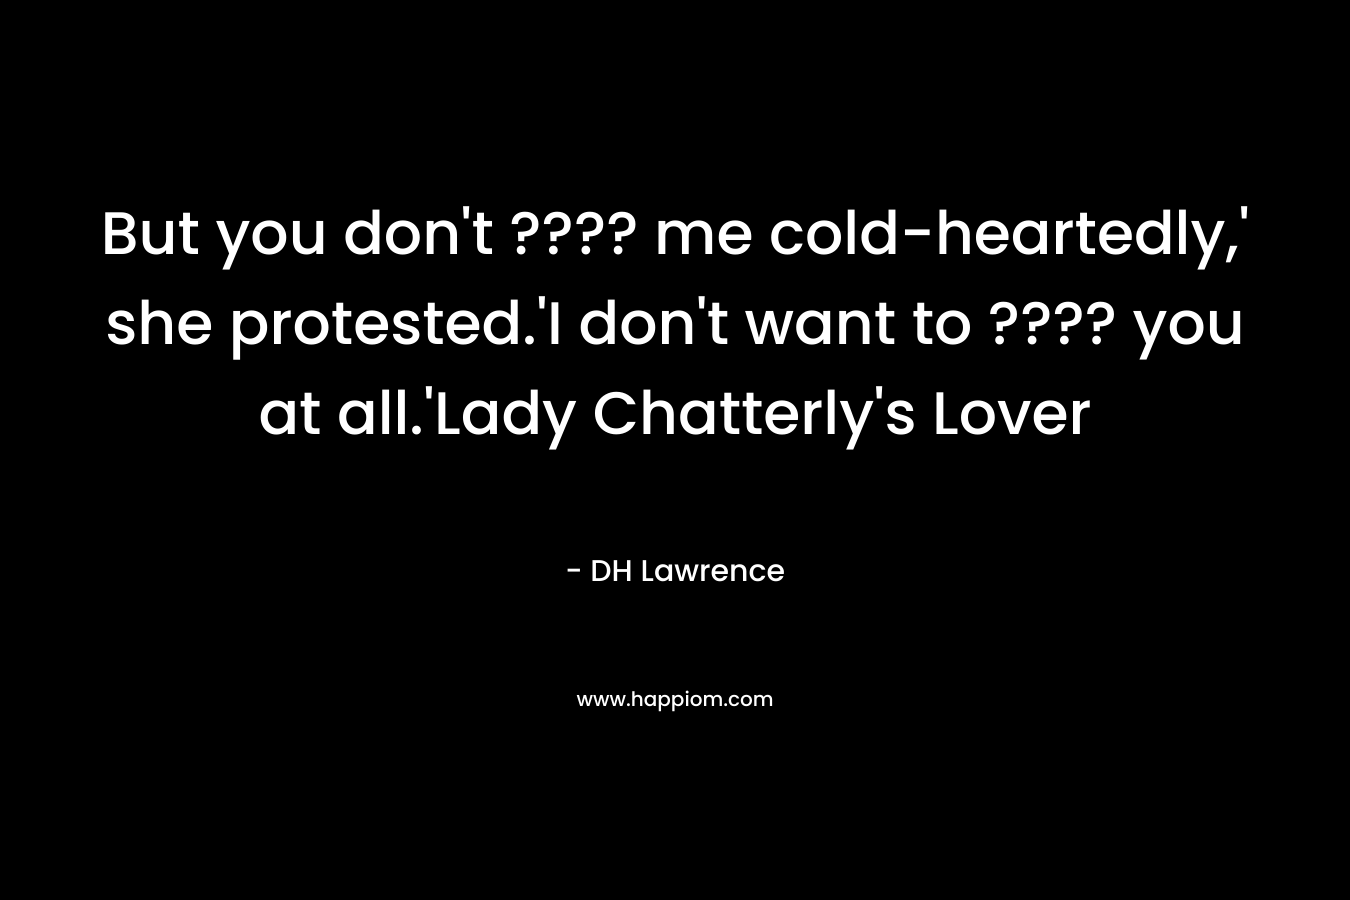 But you don't ???? me cold-heartedly,' she protested.'I don't want to ???? you at all.'Lady Chatterly's Lover